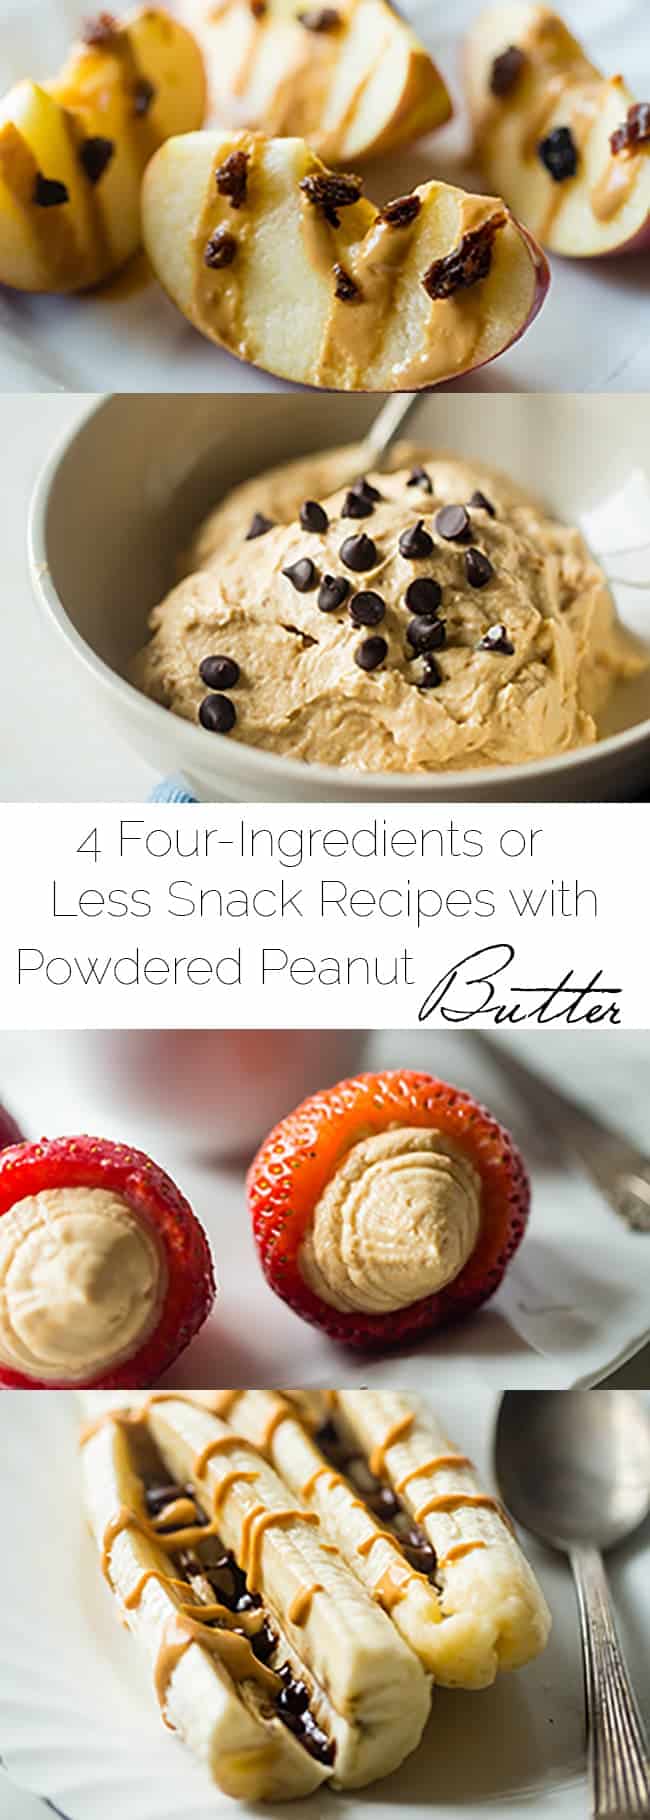 4 Four-Ingredient or Less Snack Recipes with Powdered Peanut Butter - A list of 4 healthy snack recipes that feature powdered peanut butter and have 4 ingredients or less! A great resource to find easy, simple snack ideas in one place! | Foodfaithfitness.com | @FoodFaithFit